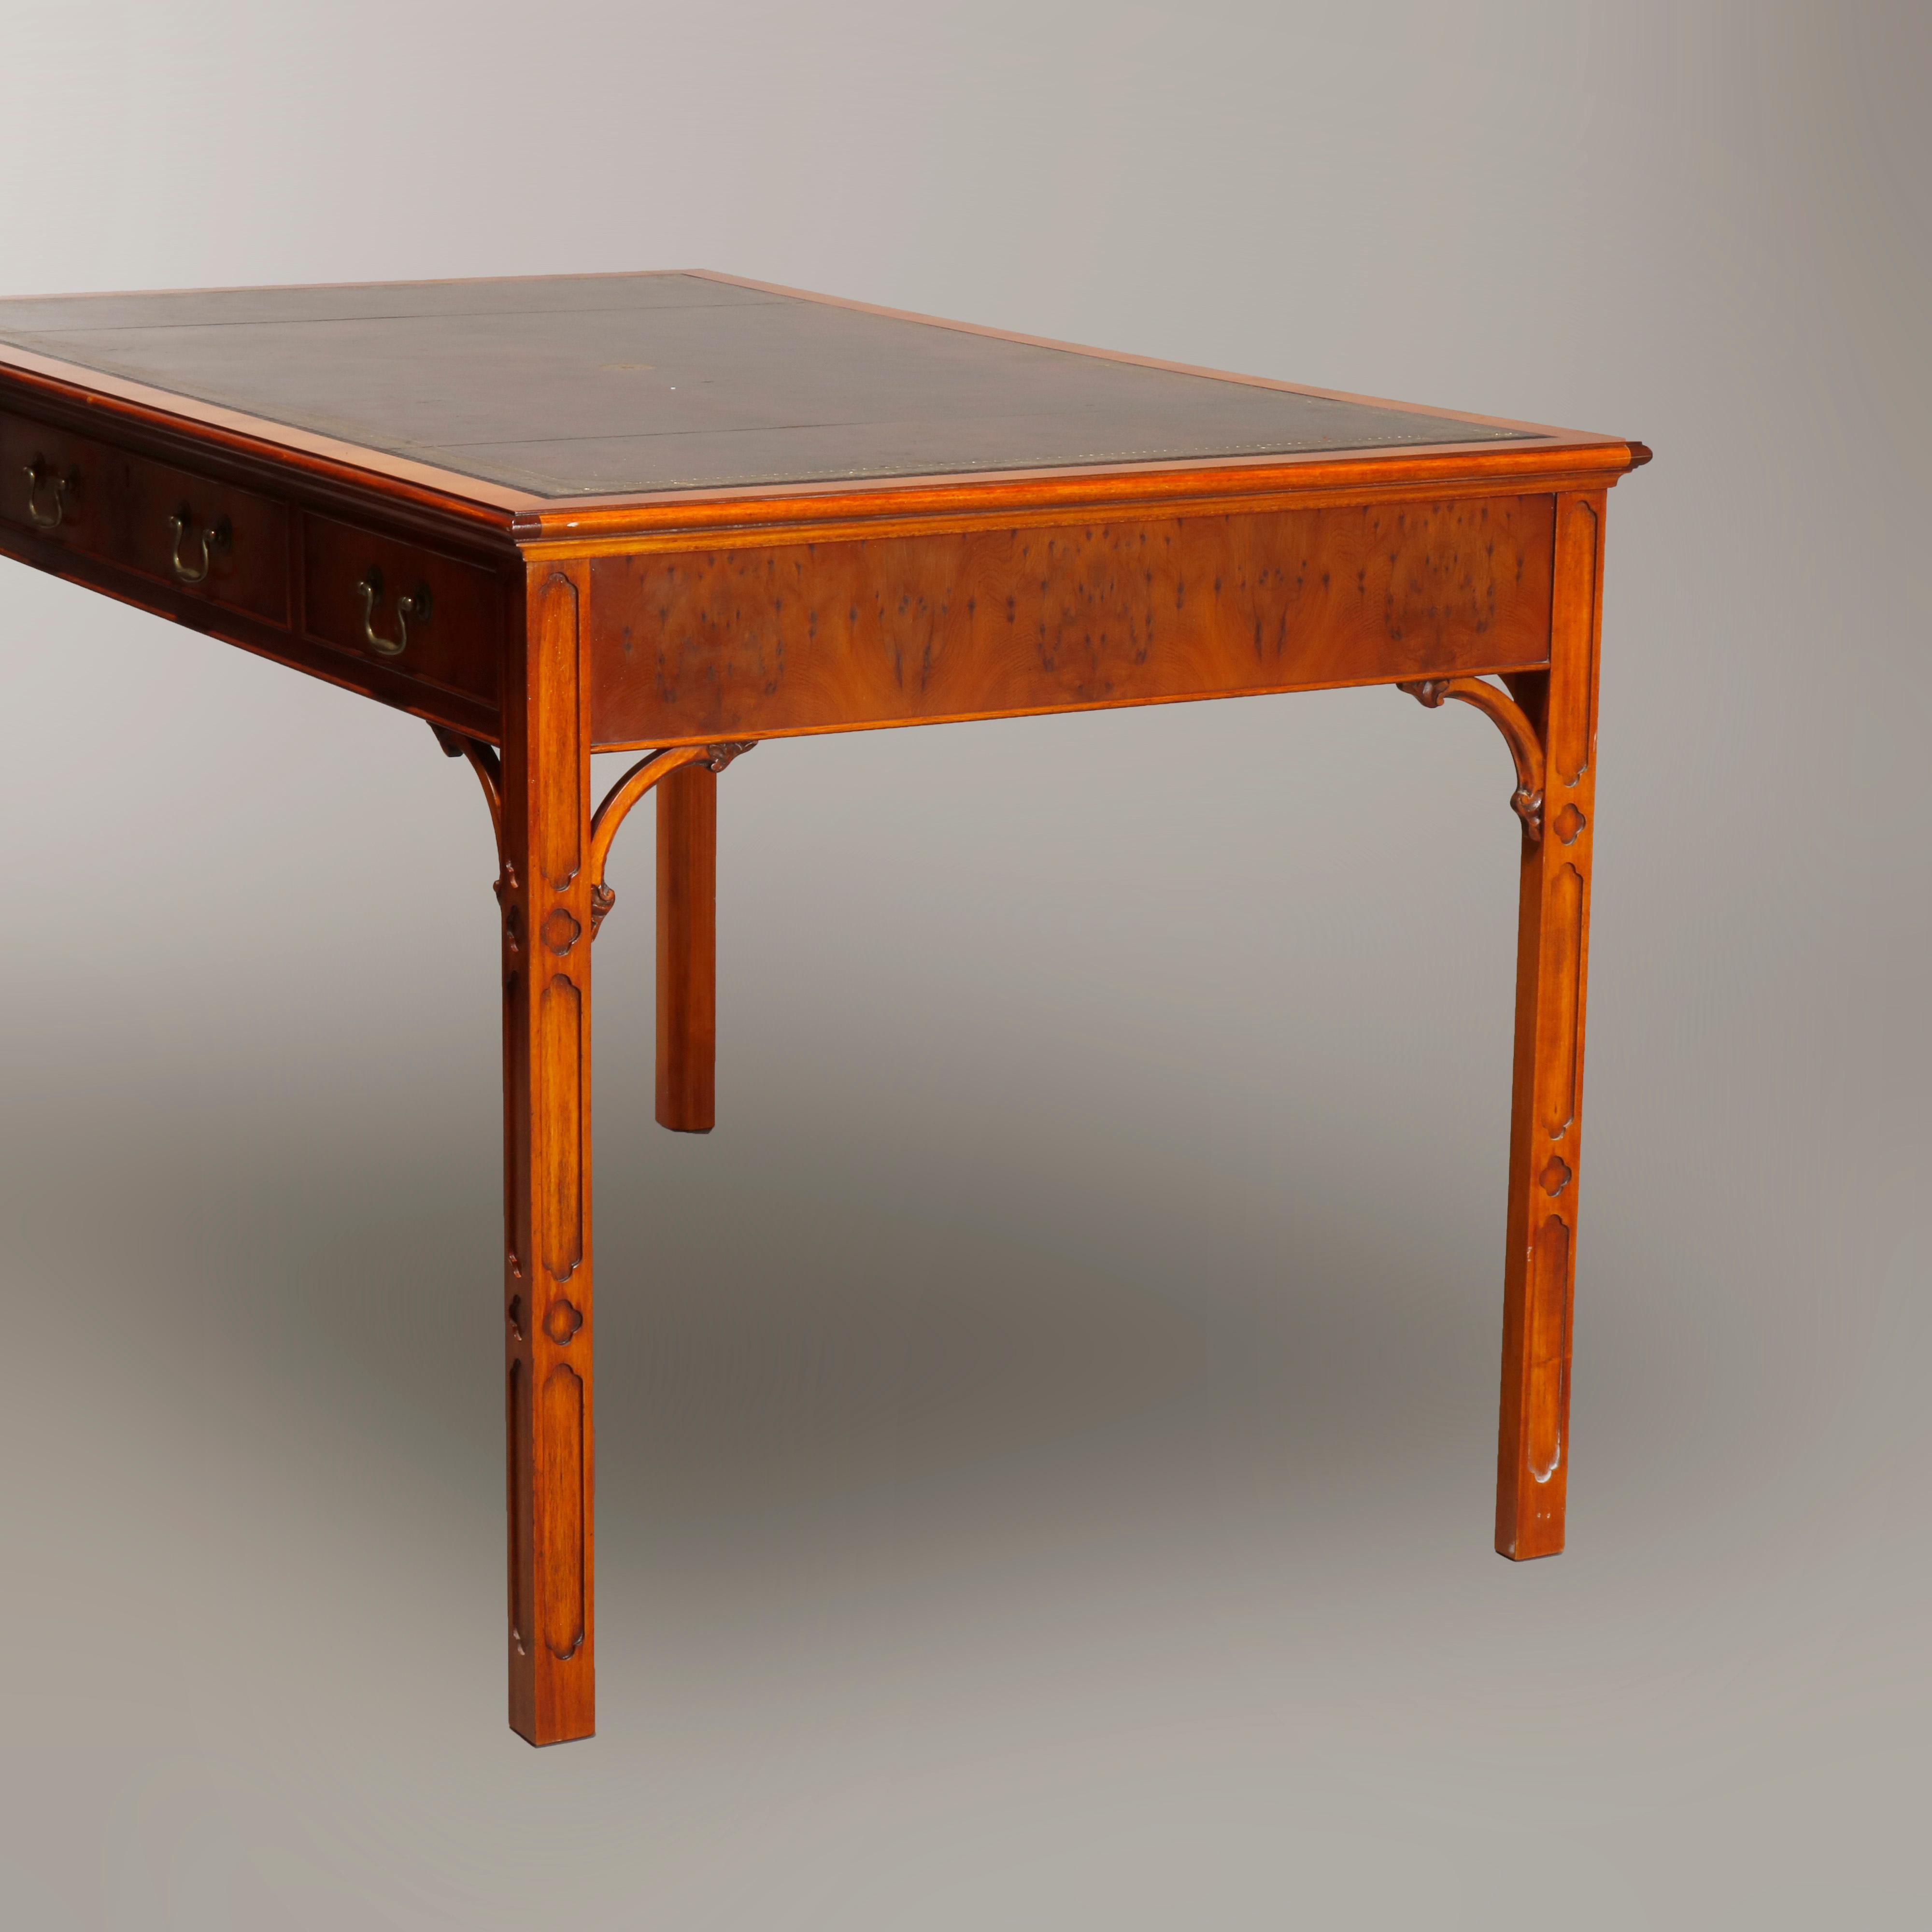 Wood Bevan Funnell English Chinese Chippendale Mahogany & Olivewood Desk, 20th C